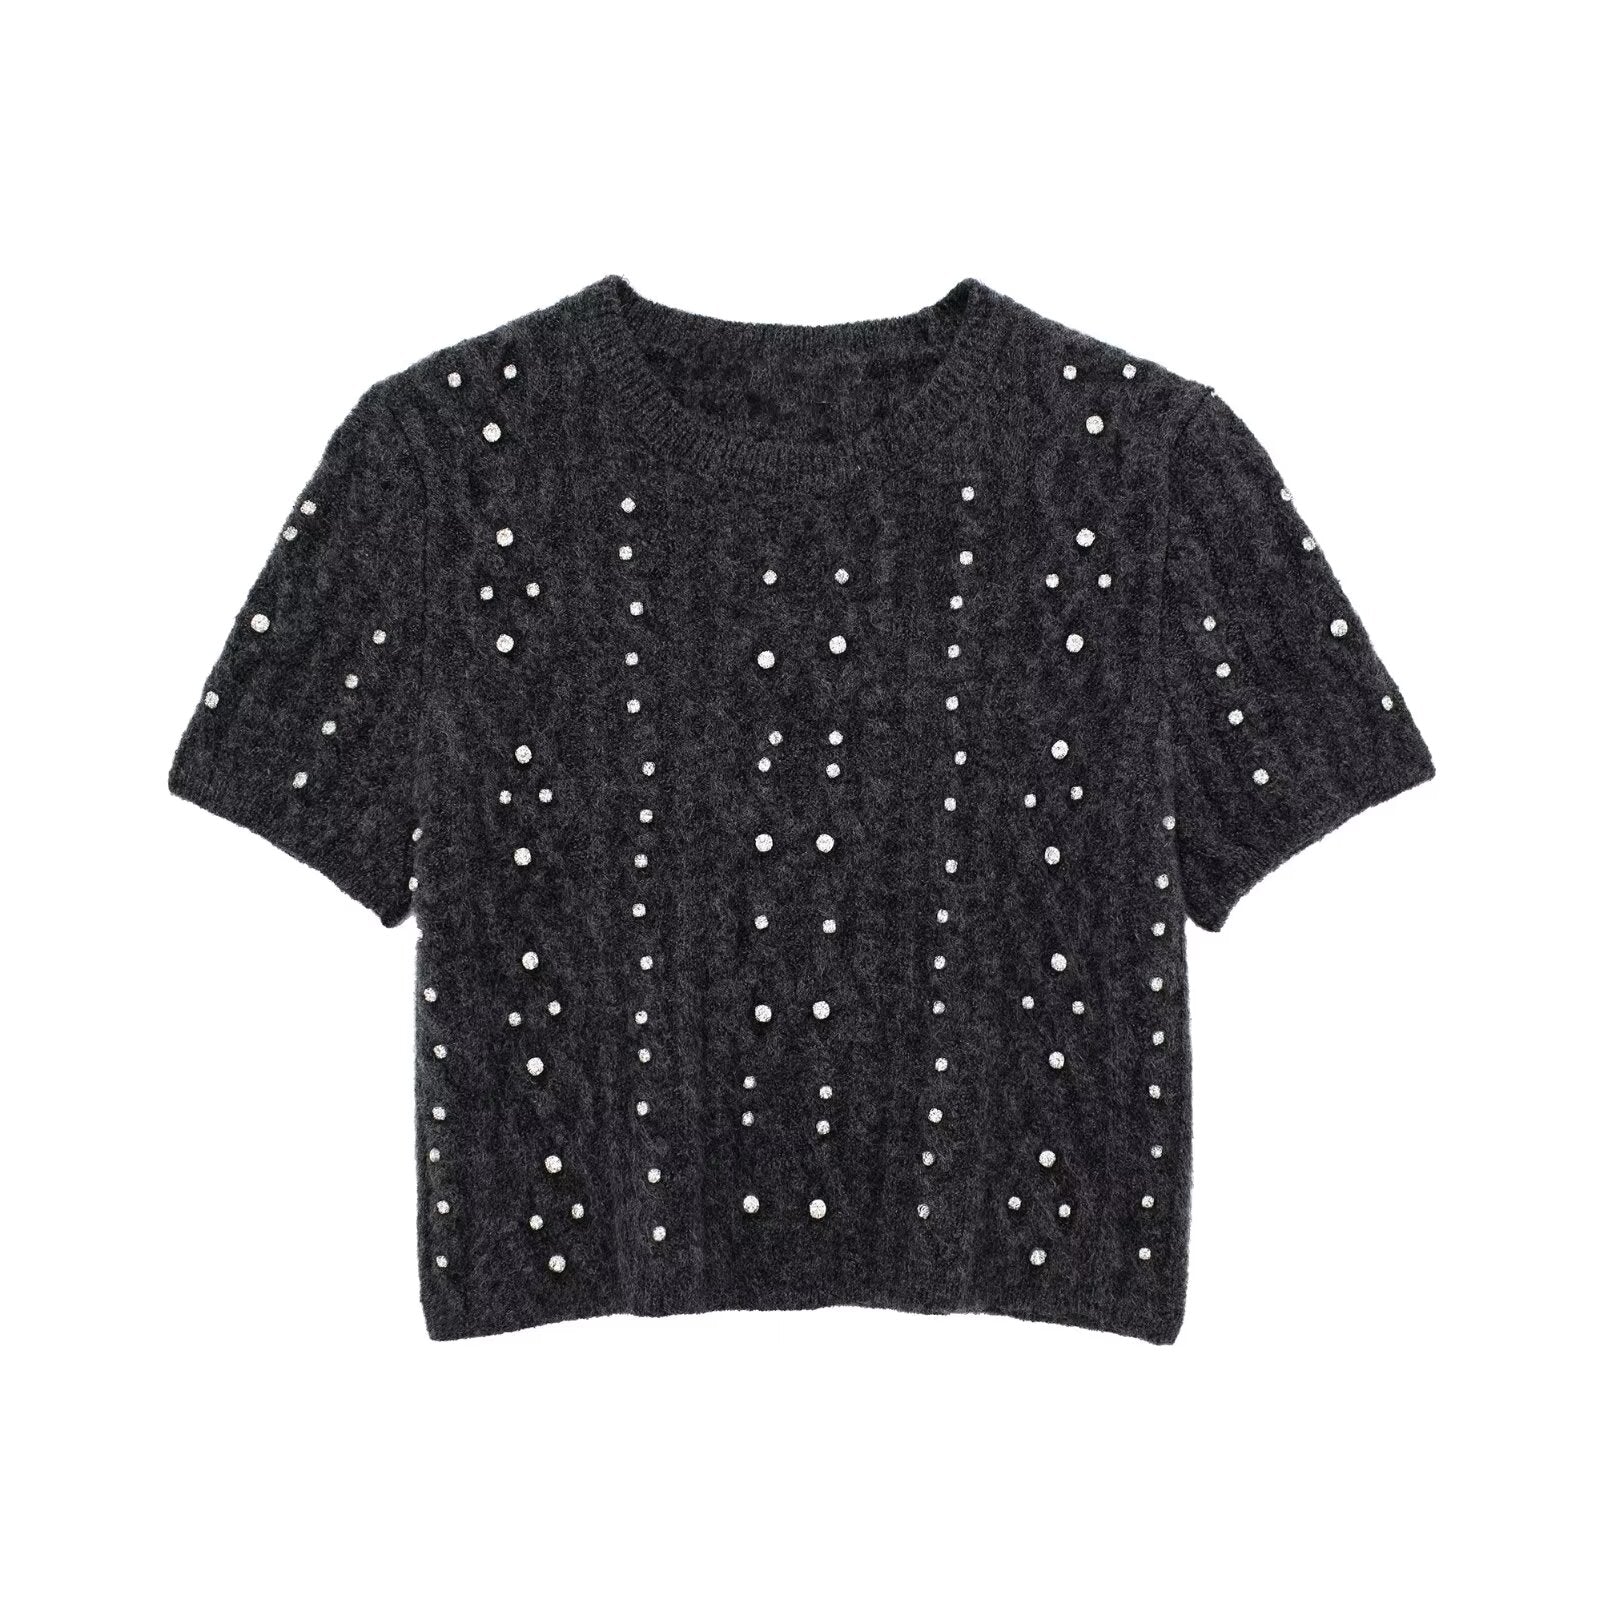 【MOQ-5 packs】 Autumn Winter Women Clothing Classic Round Neck Sweater With Short Sleeves Beaded Short Sweater